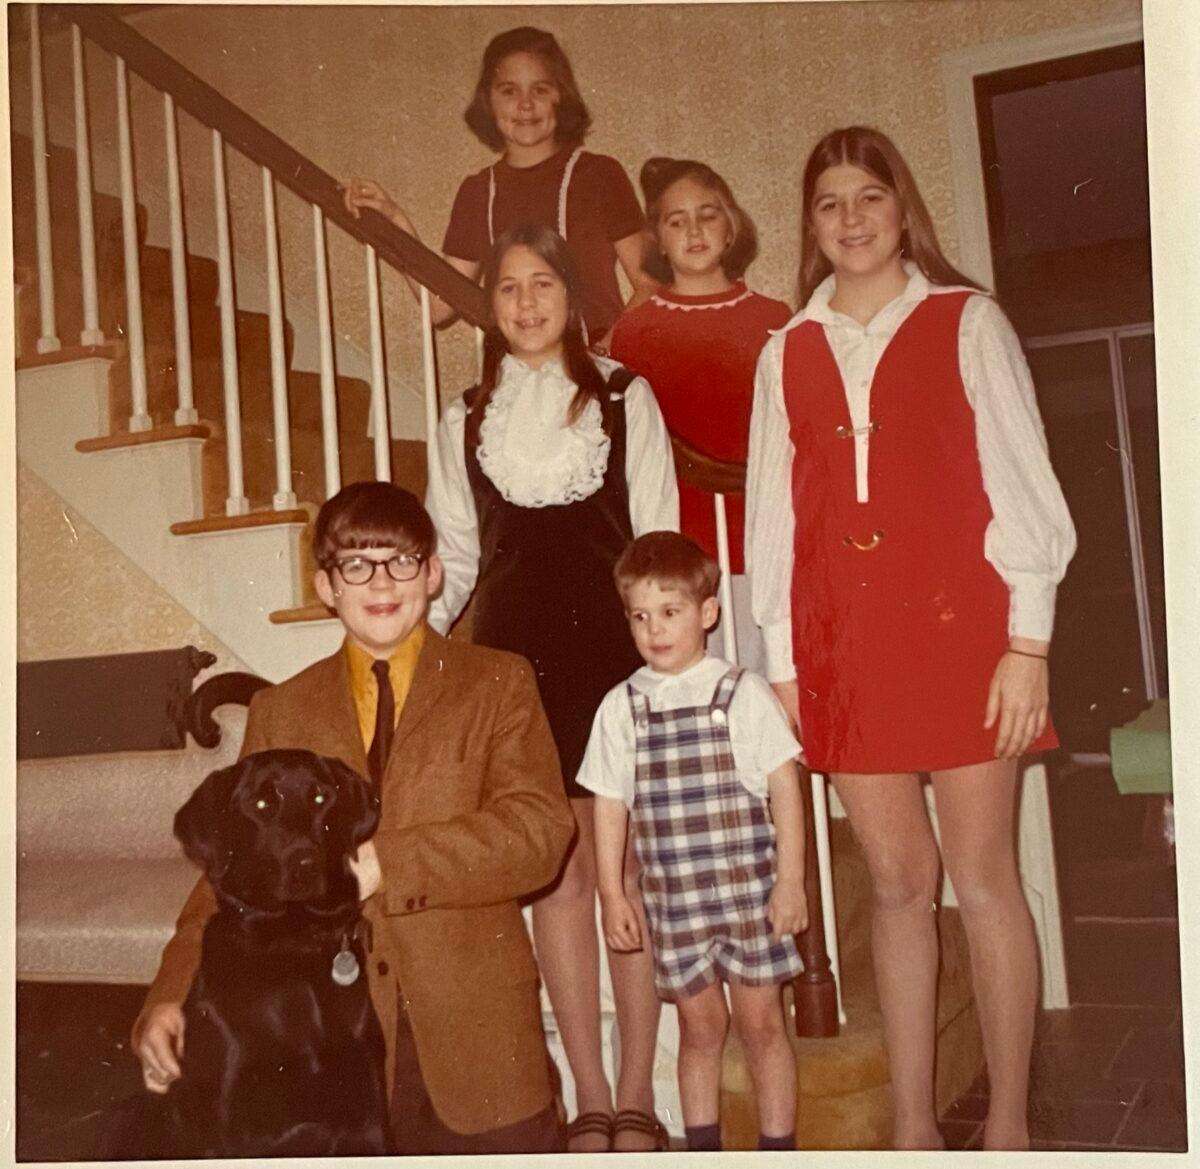 The author and her five siblings in Connecticut in December 1970. The girls are wearing velvet dresses made by their mother, who made all of their dresses growing up. (Courtesy of Helene Purdy)